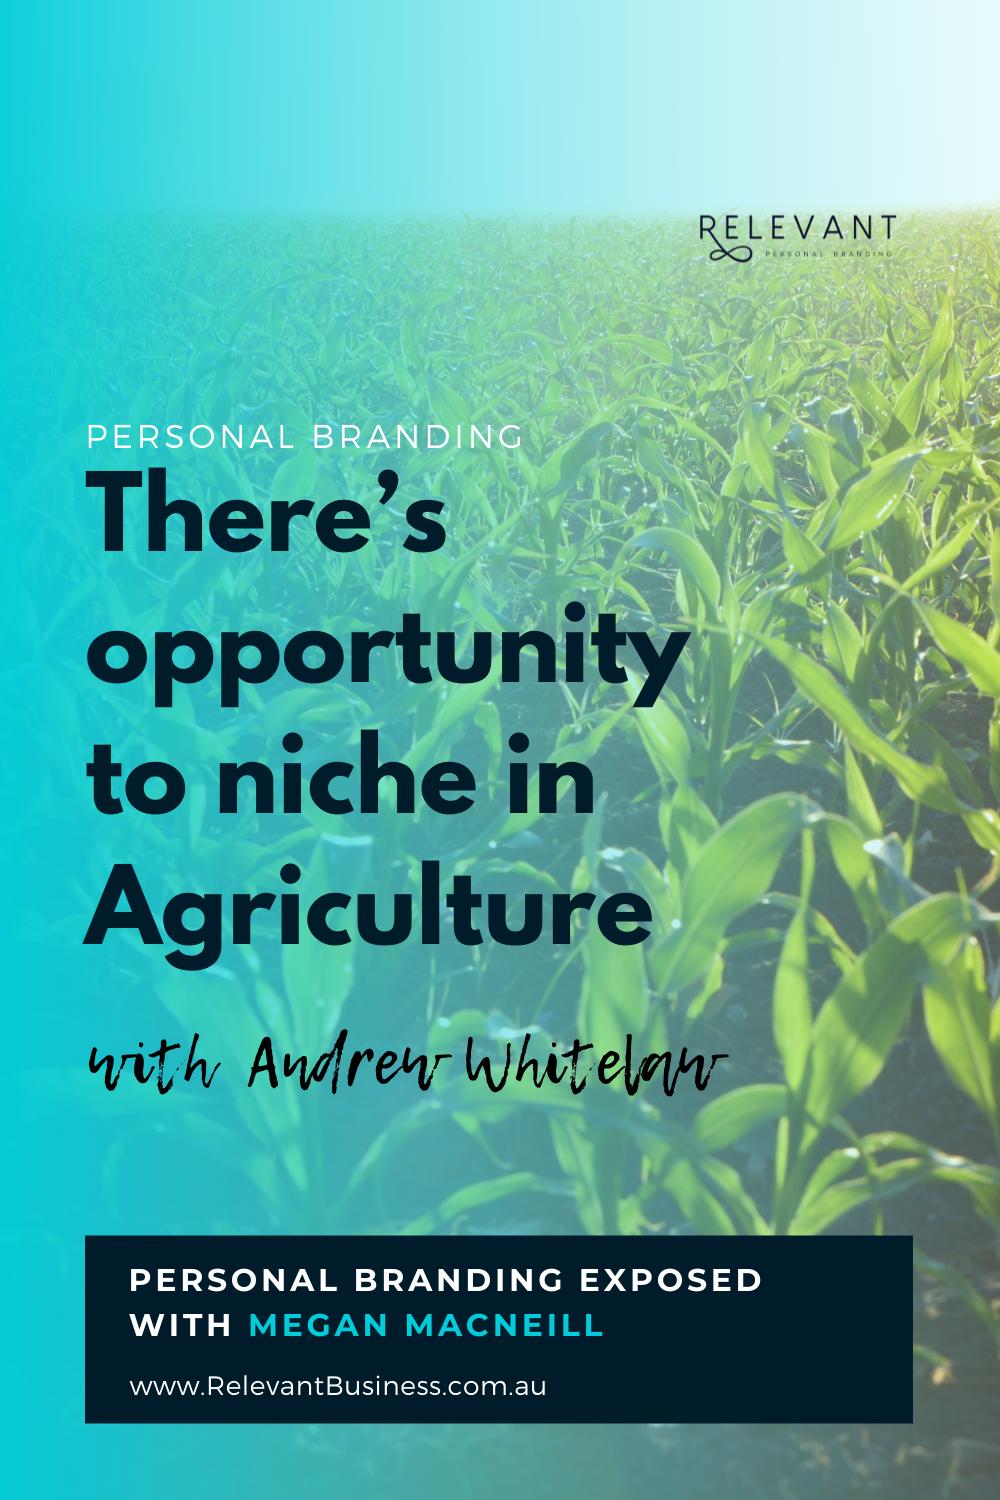 Opportunity to niche in agriculture